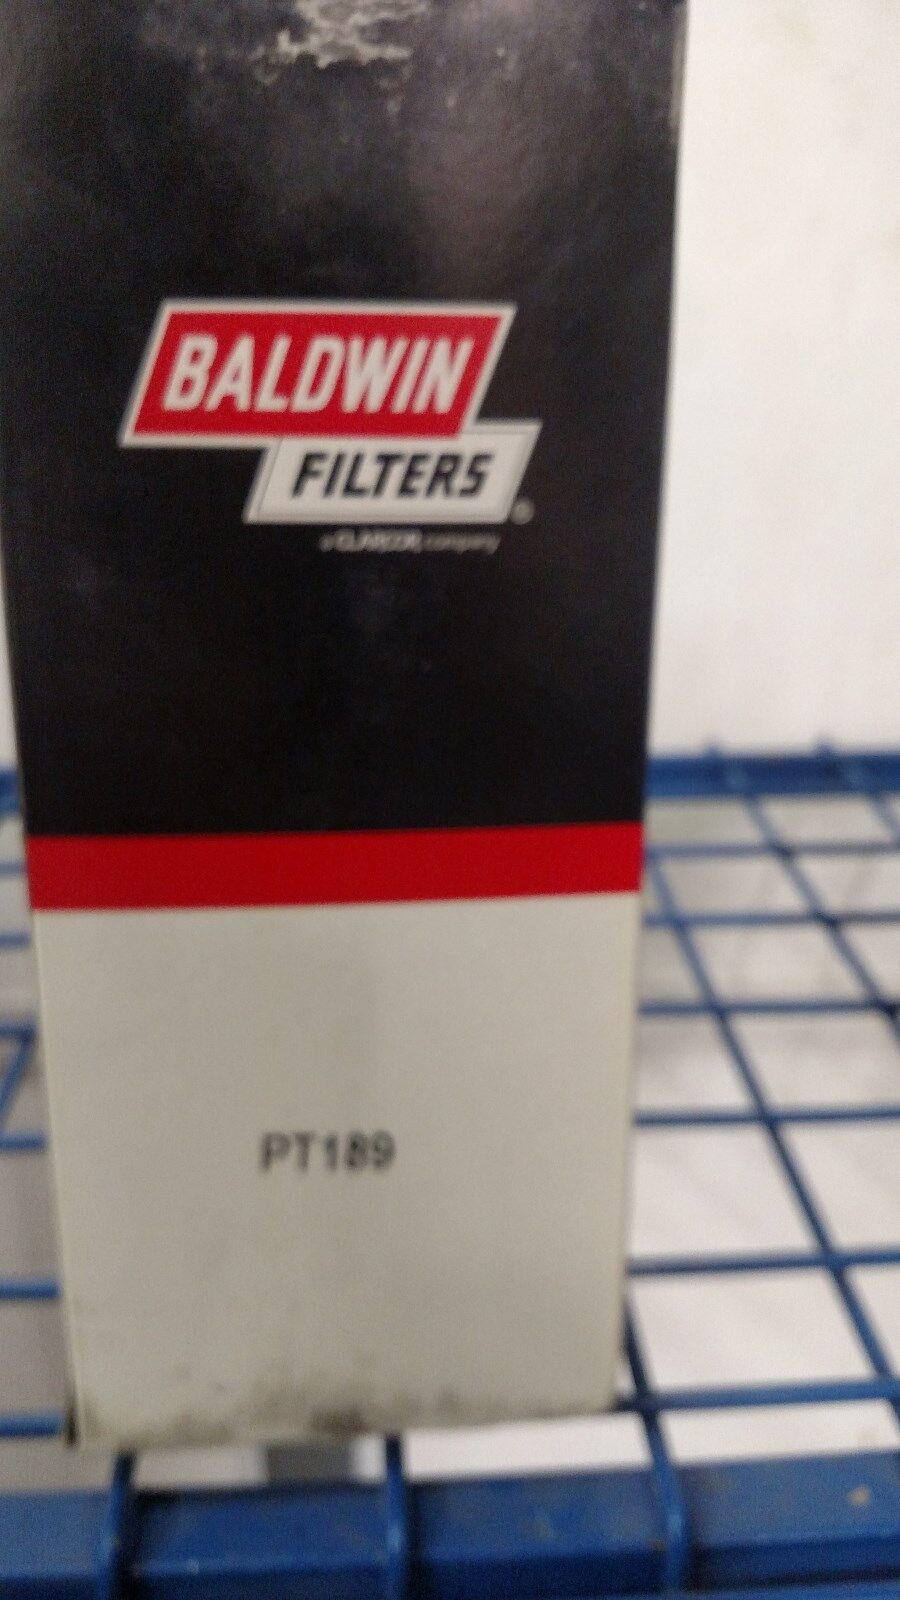 BALDWIN FILTERS PT189 Hydraulic/Transmission Element, 9-3/16 In